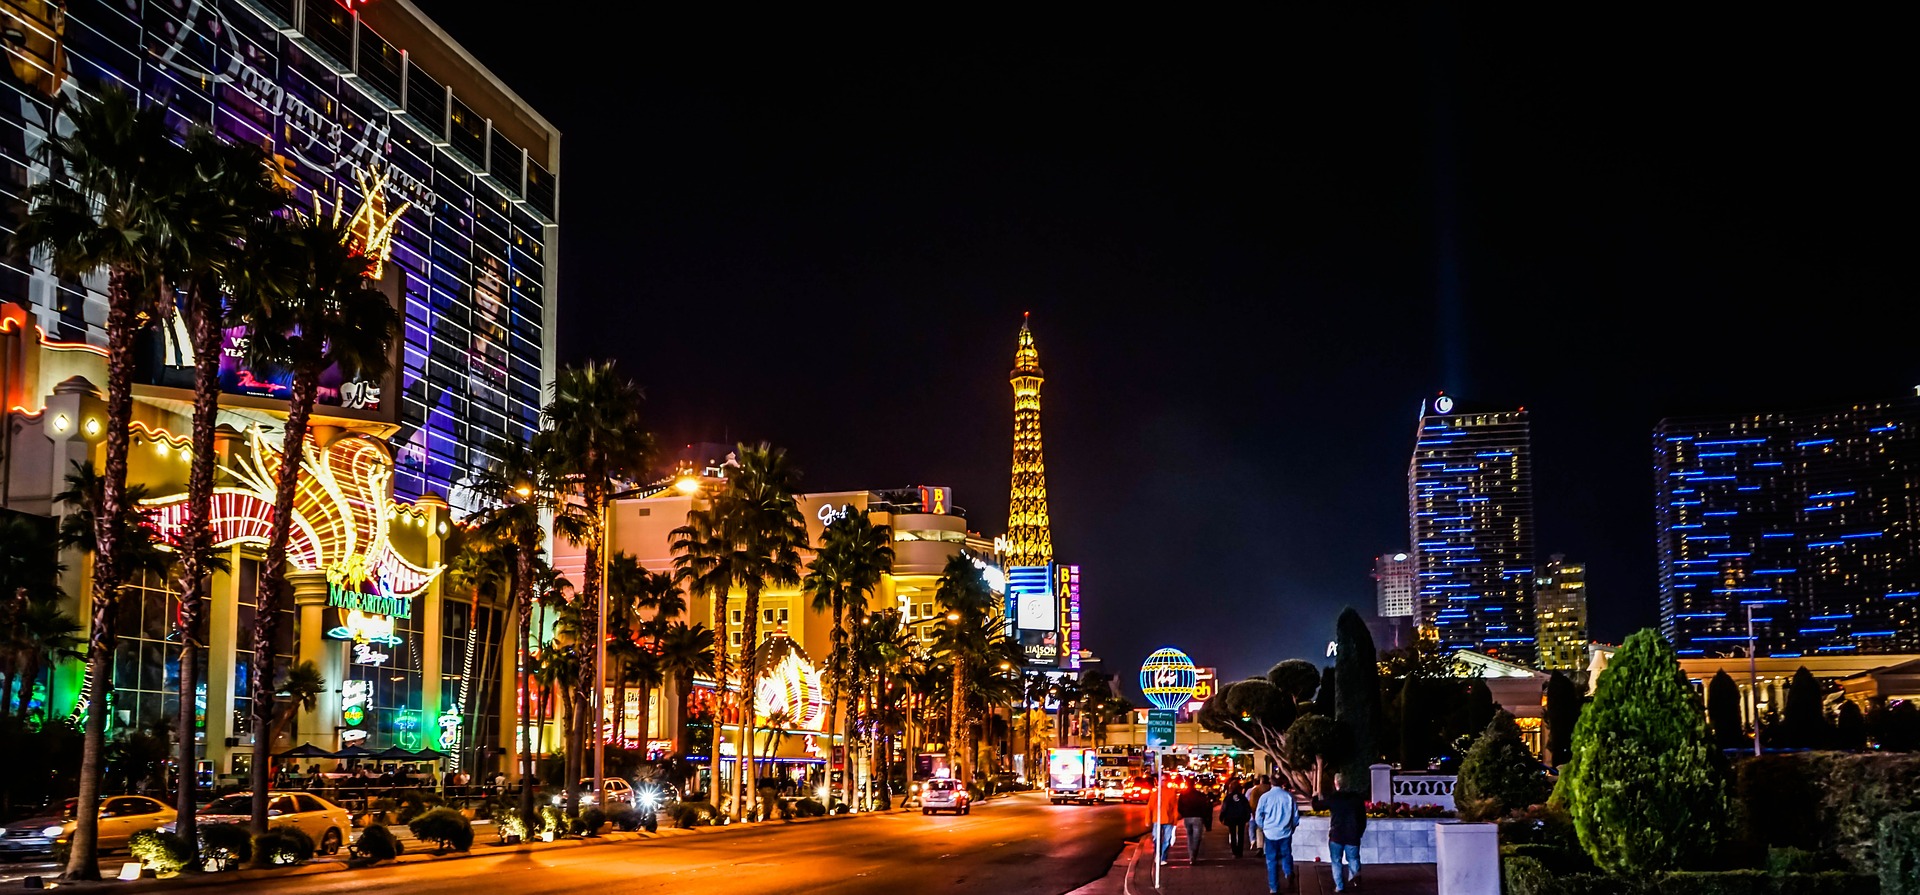 Your Chance to Head to Las Vegas for Pennies!